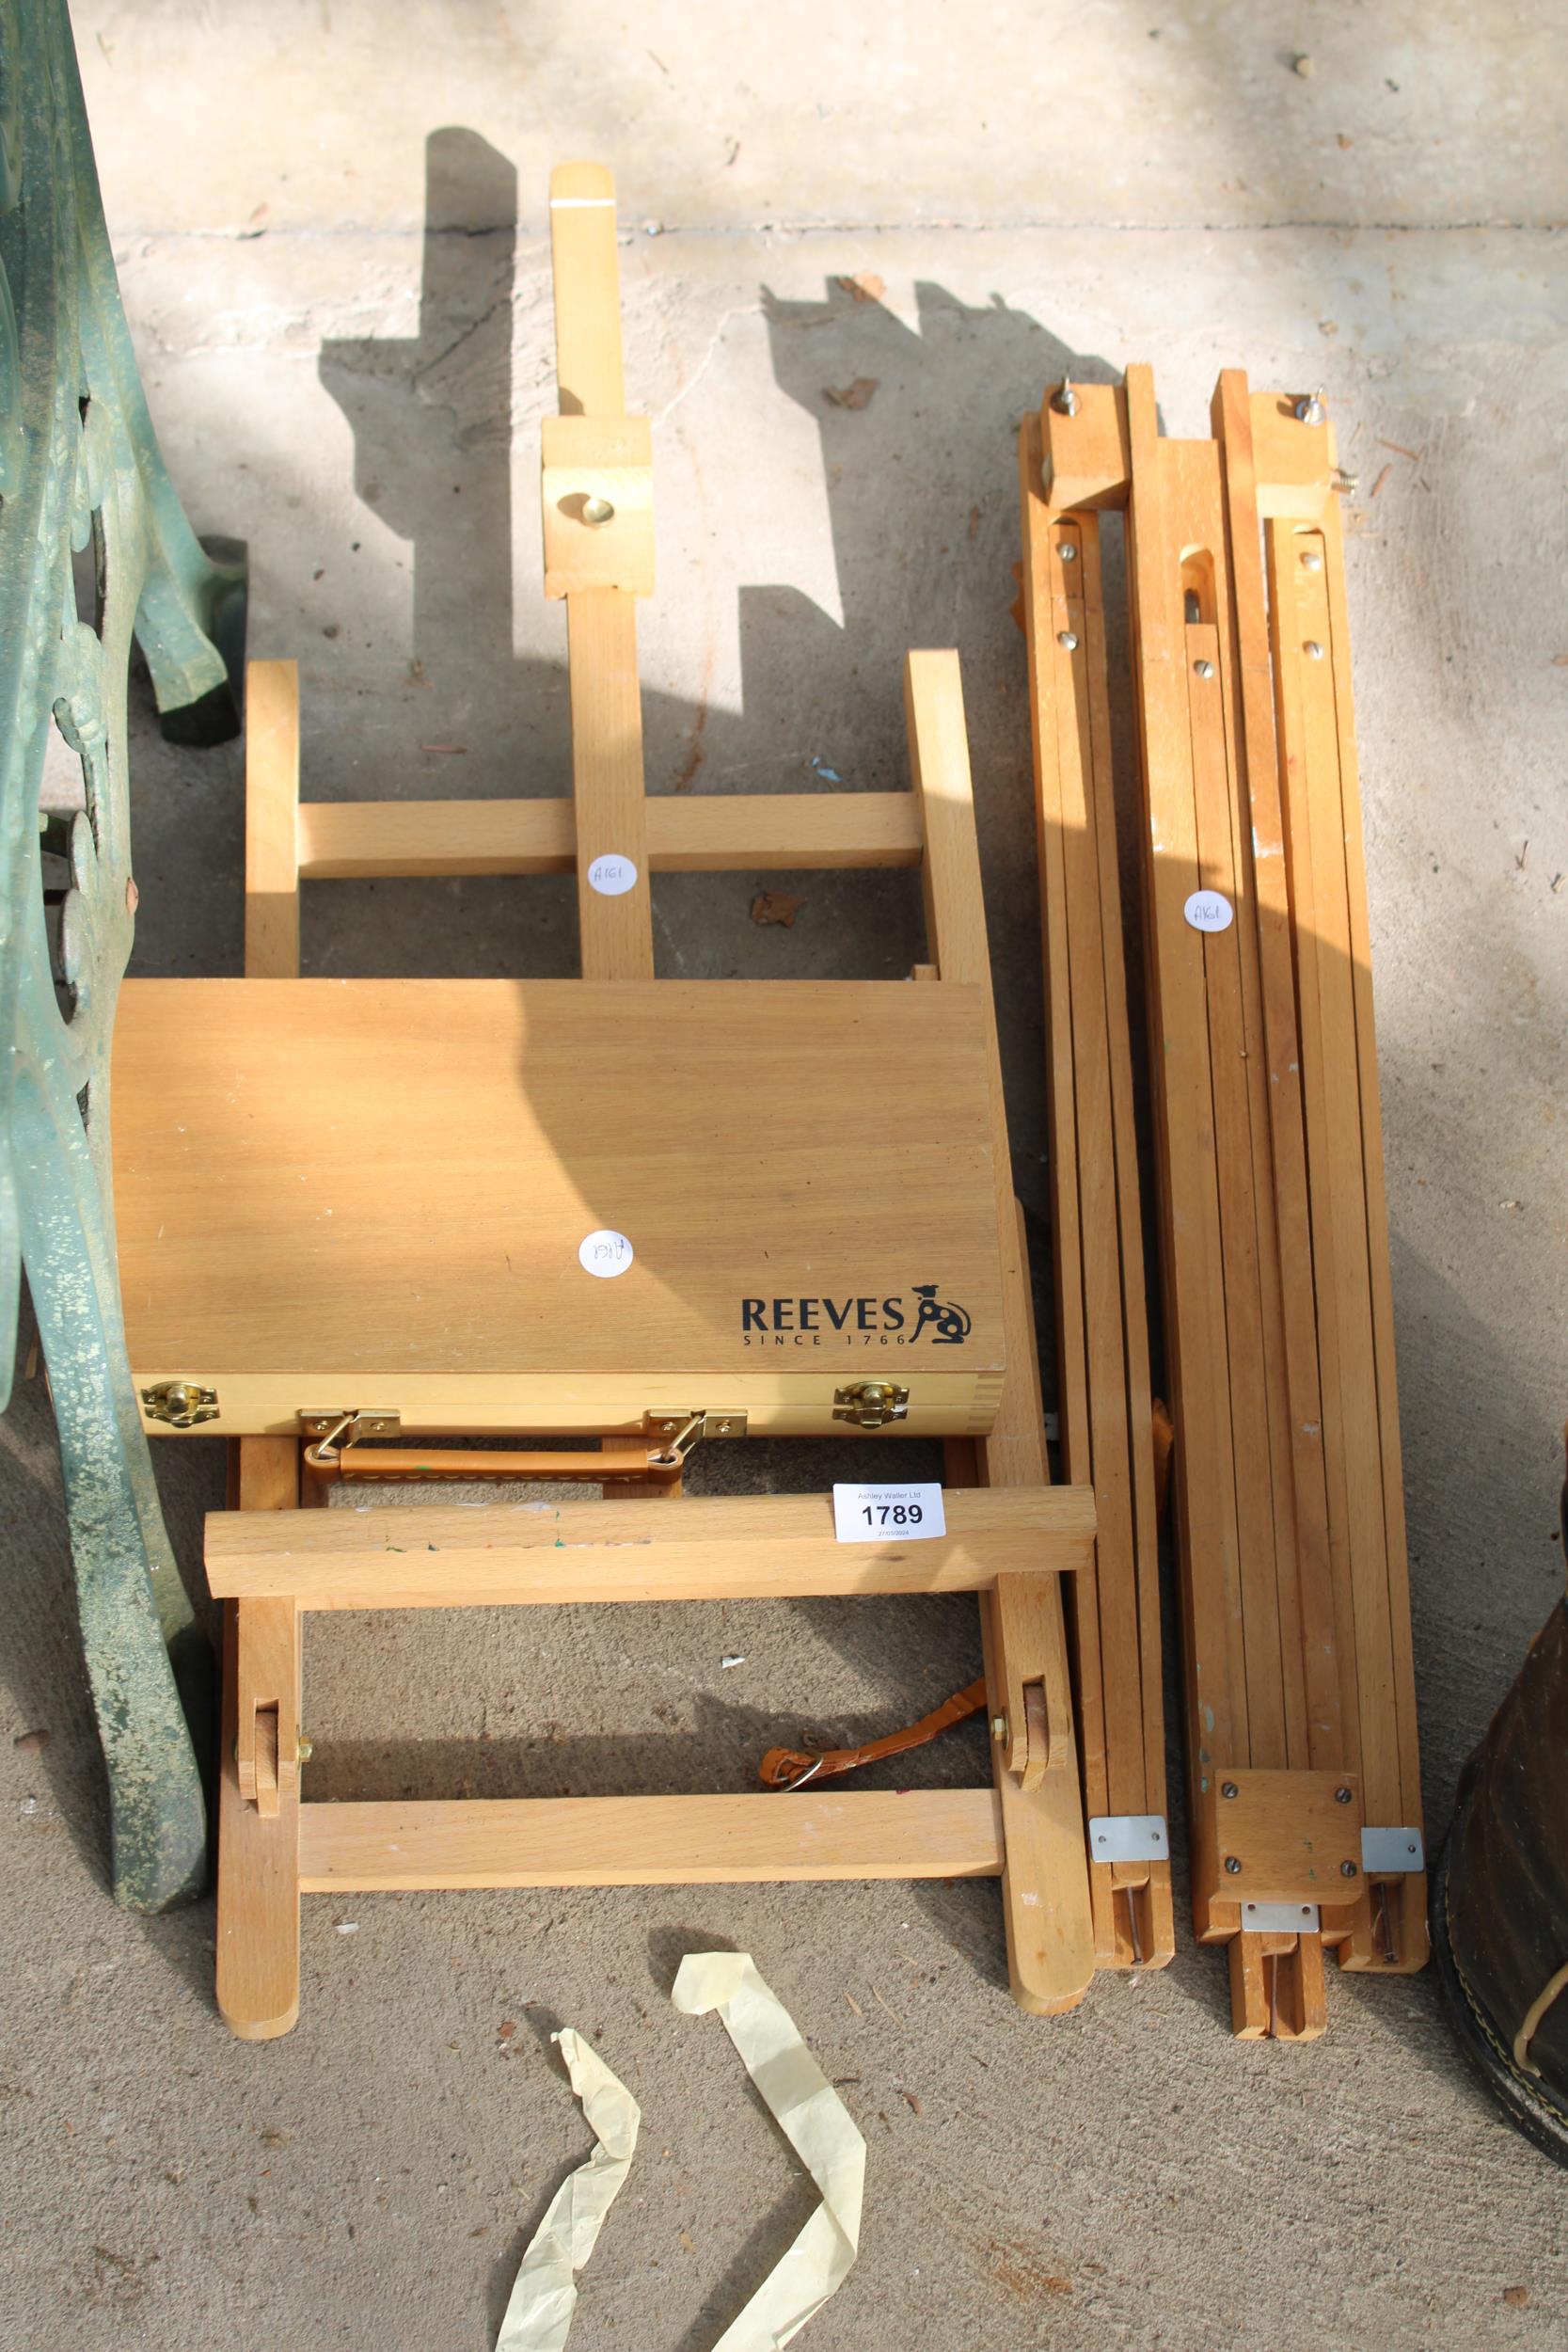 TWO WOODEN ARTISTS EASELS AND A REEVES PAINT SET